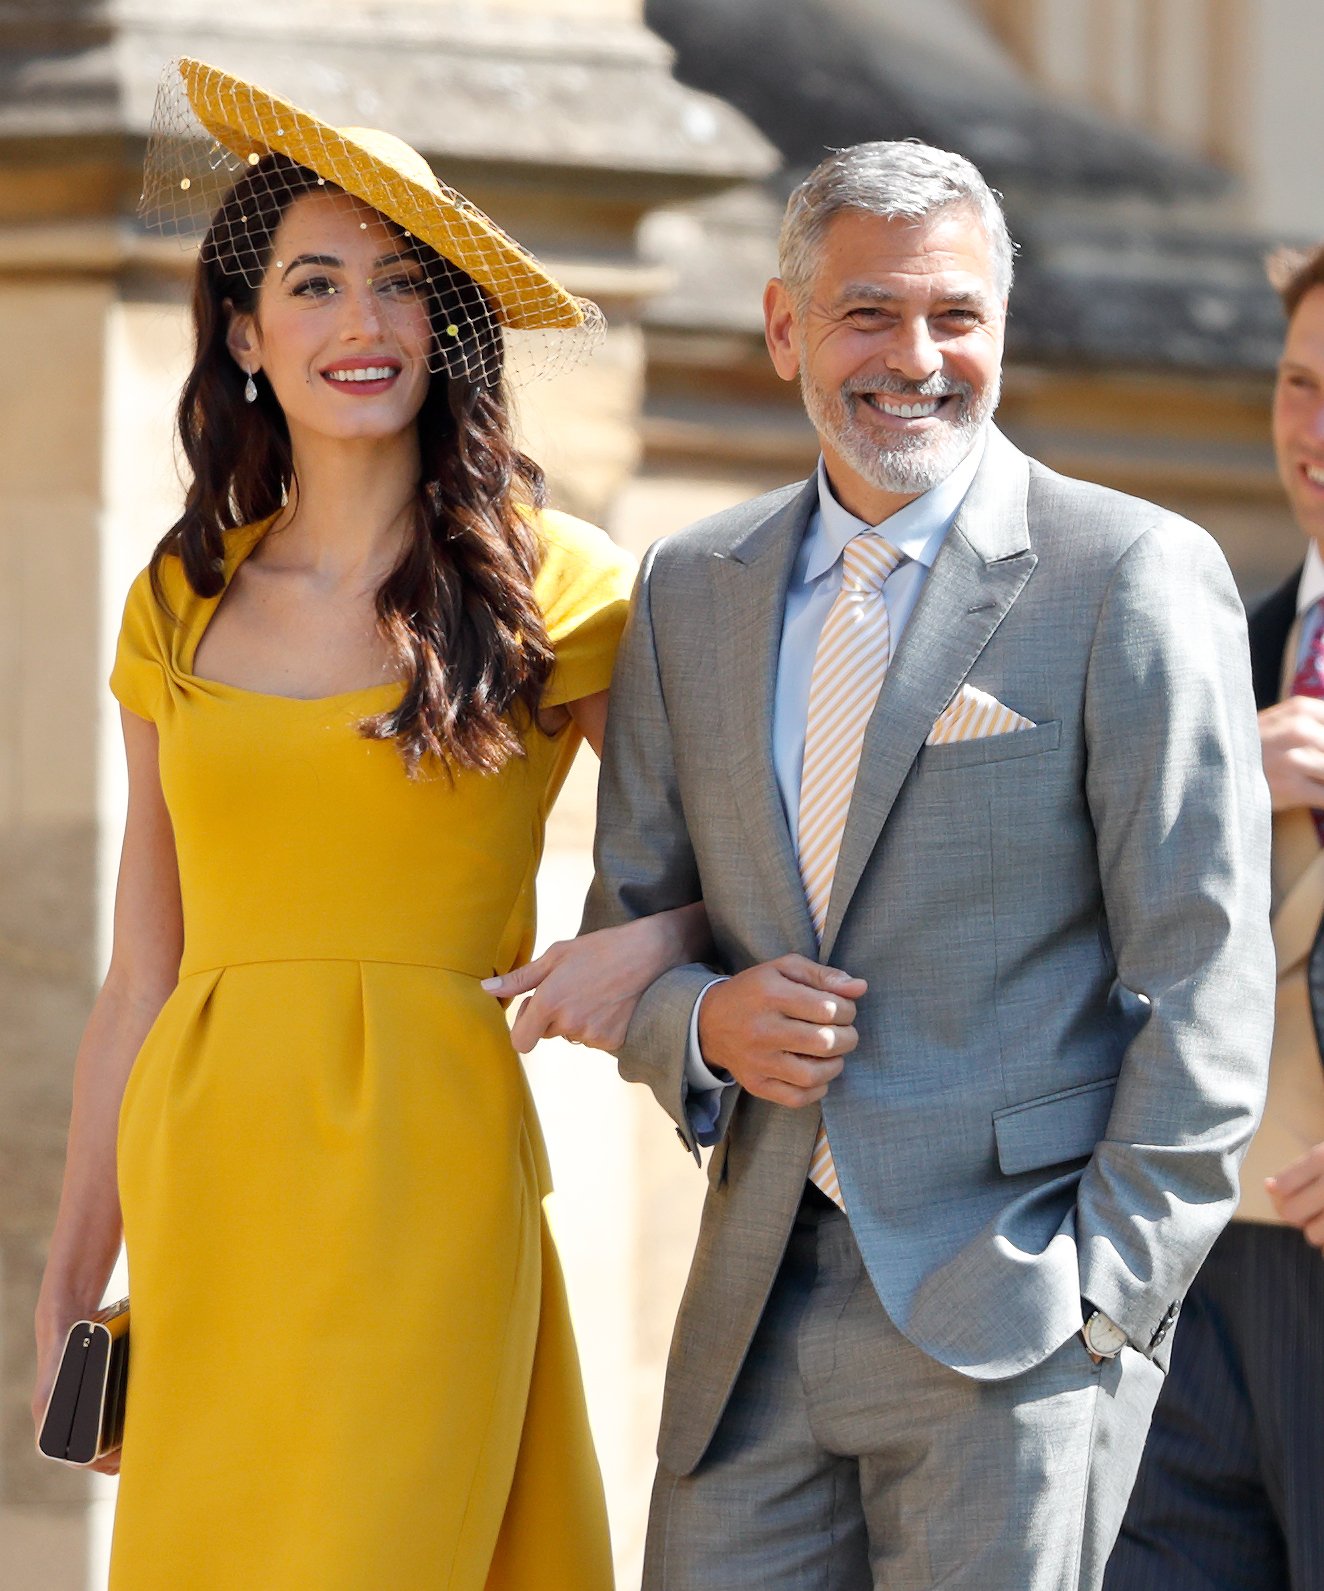 Amal Clooney and George Clooney attend the wedding of Prince Harry to Ms Meghan Markle at St George's Chapel, Windsor Castle on May 19, 2018 in Windsor, England | Source: Getty Images 